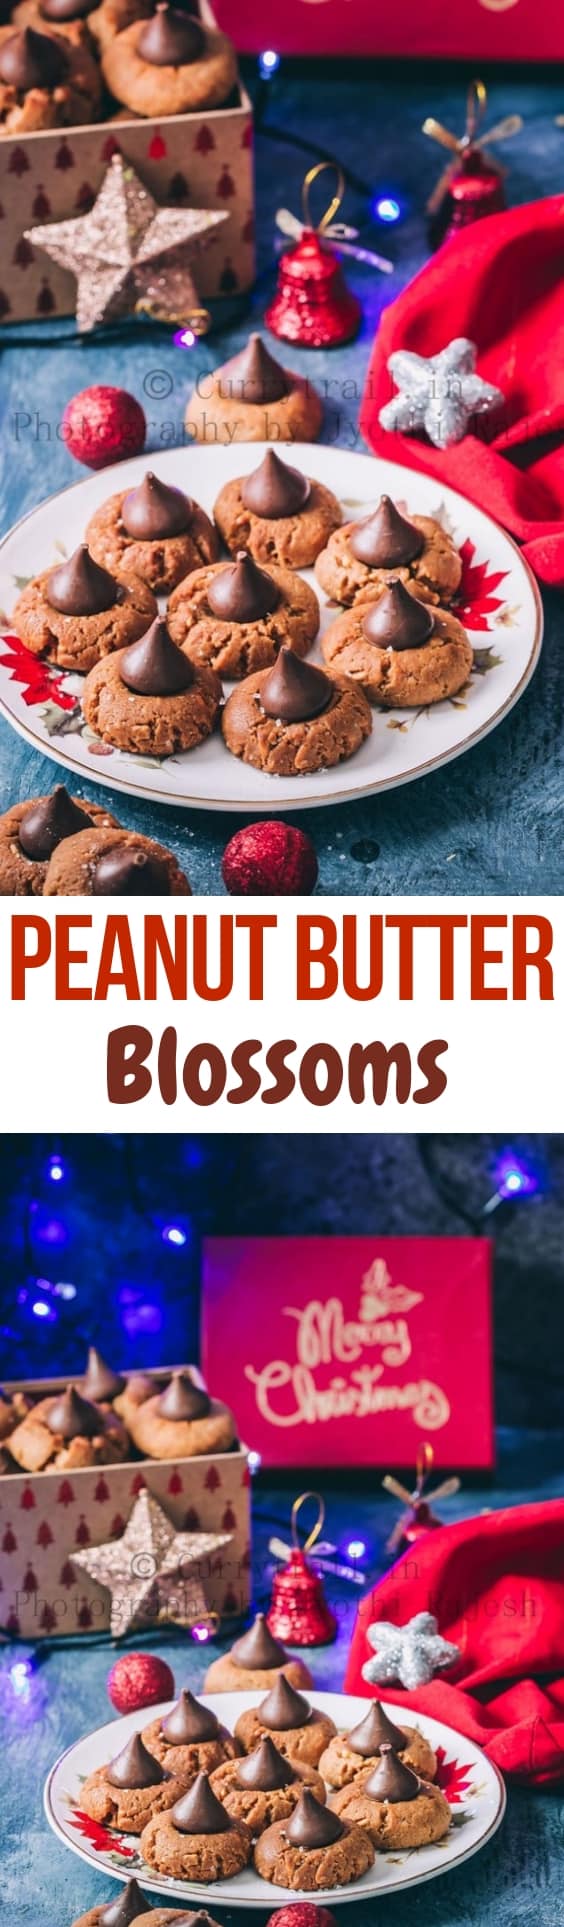 peanut butter kiss cookies are soft chewy cookies that's great for cookie exchange during the holidays. Soft cookies made of peanut butter and topped with chocolate kiss candy at the center is a classic holiday cookie